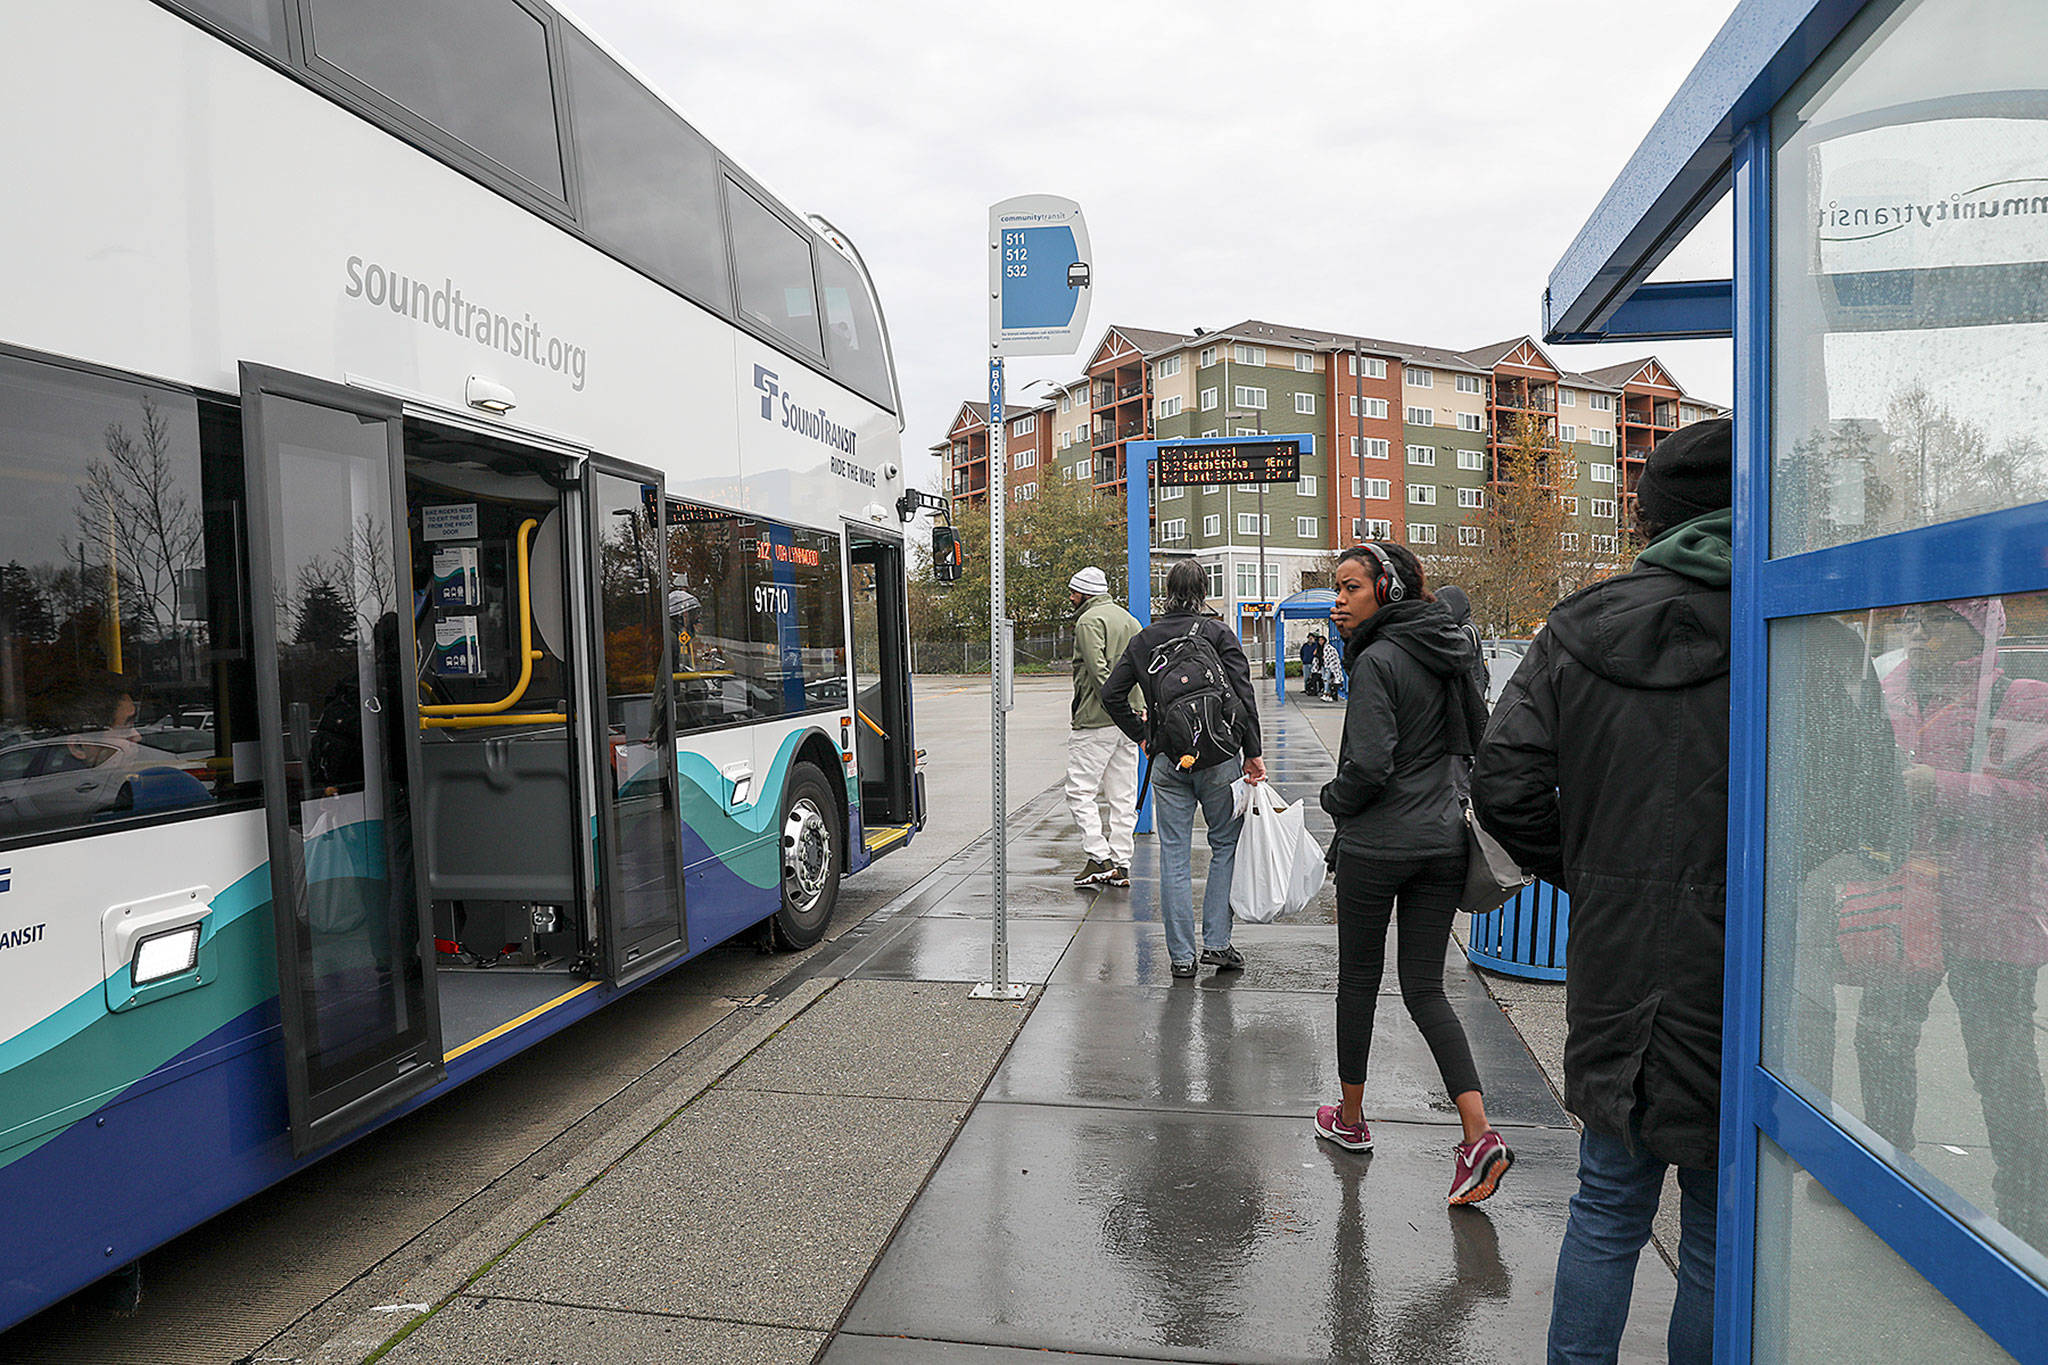 Snohomish County officials are beginning to scout potential sites for future light rail stations, including the one that will be located near the Ash Way Park and Ride. (Lizz Giordano / The Herald)